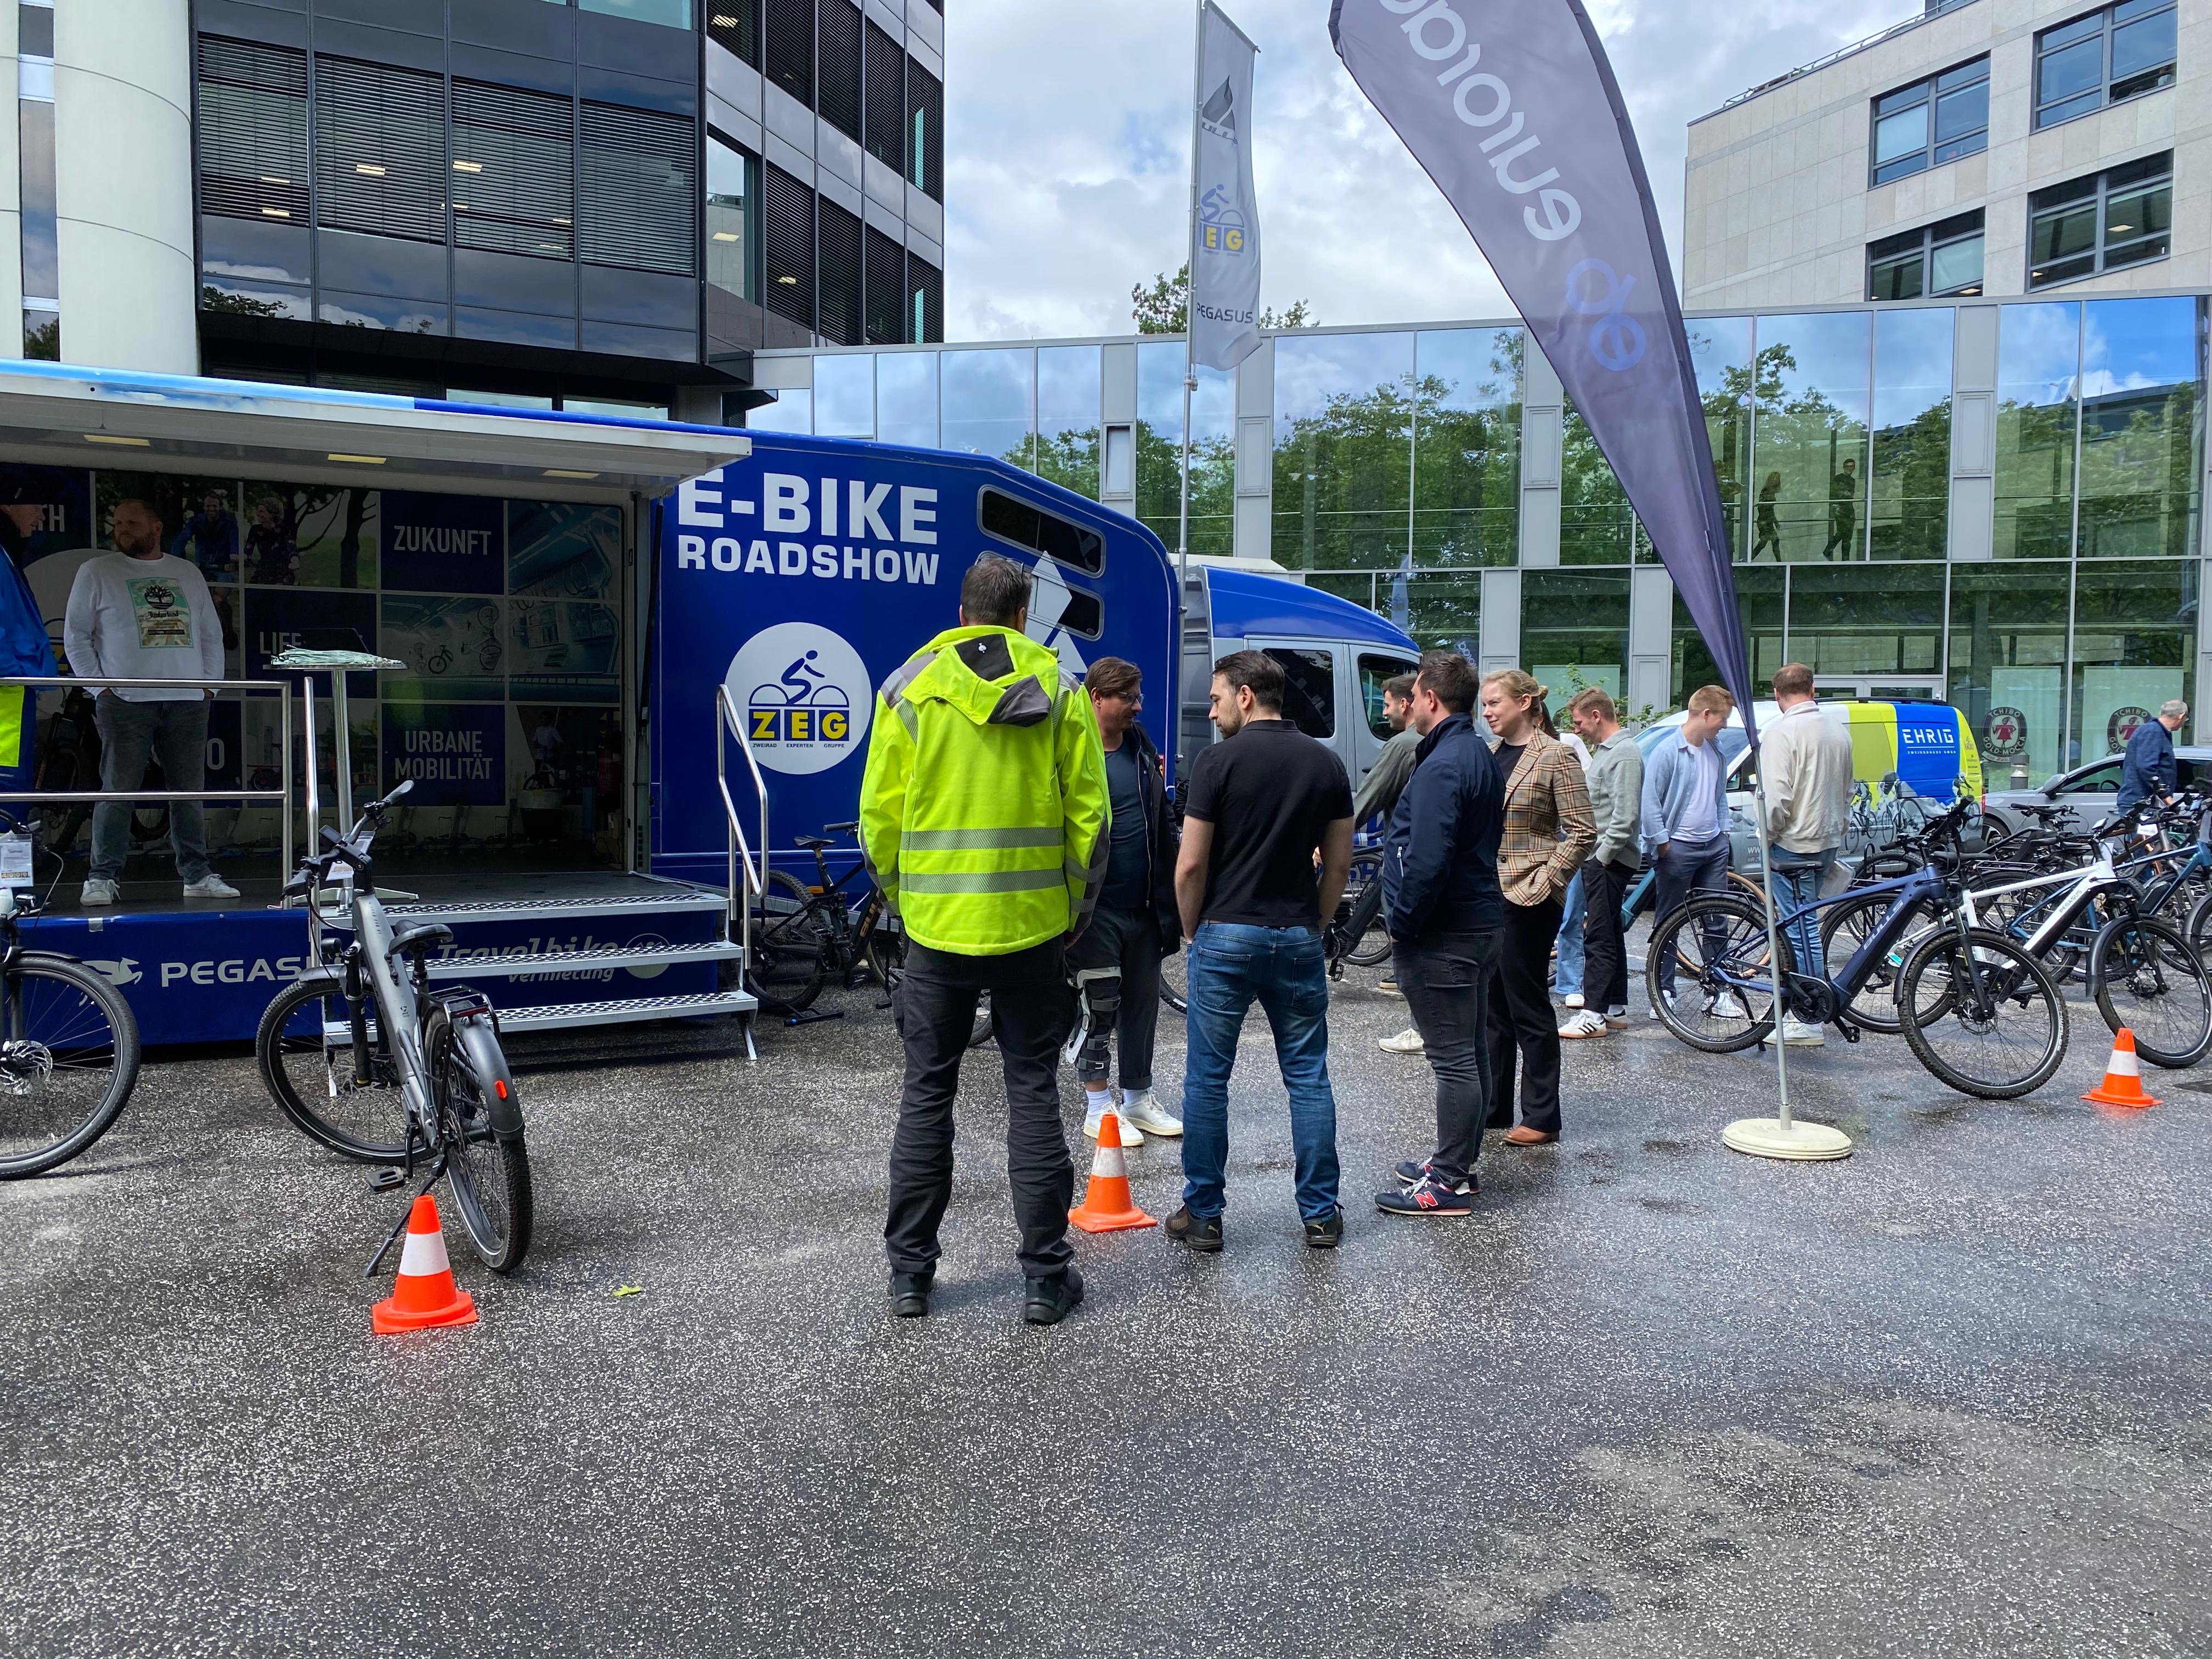 A group of people gathered around a blue van with 'E-BIKE ROADSHOW' written on it, various e-bikes on display, and a person in a high-visibility jacket near traffic cones.